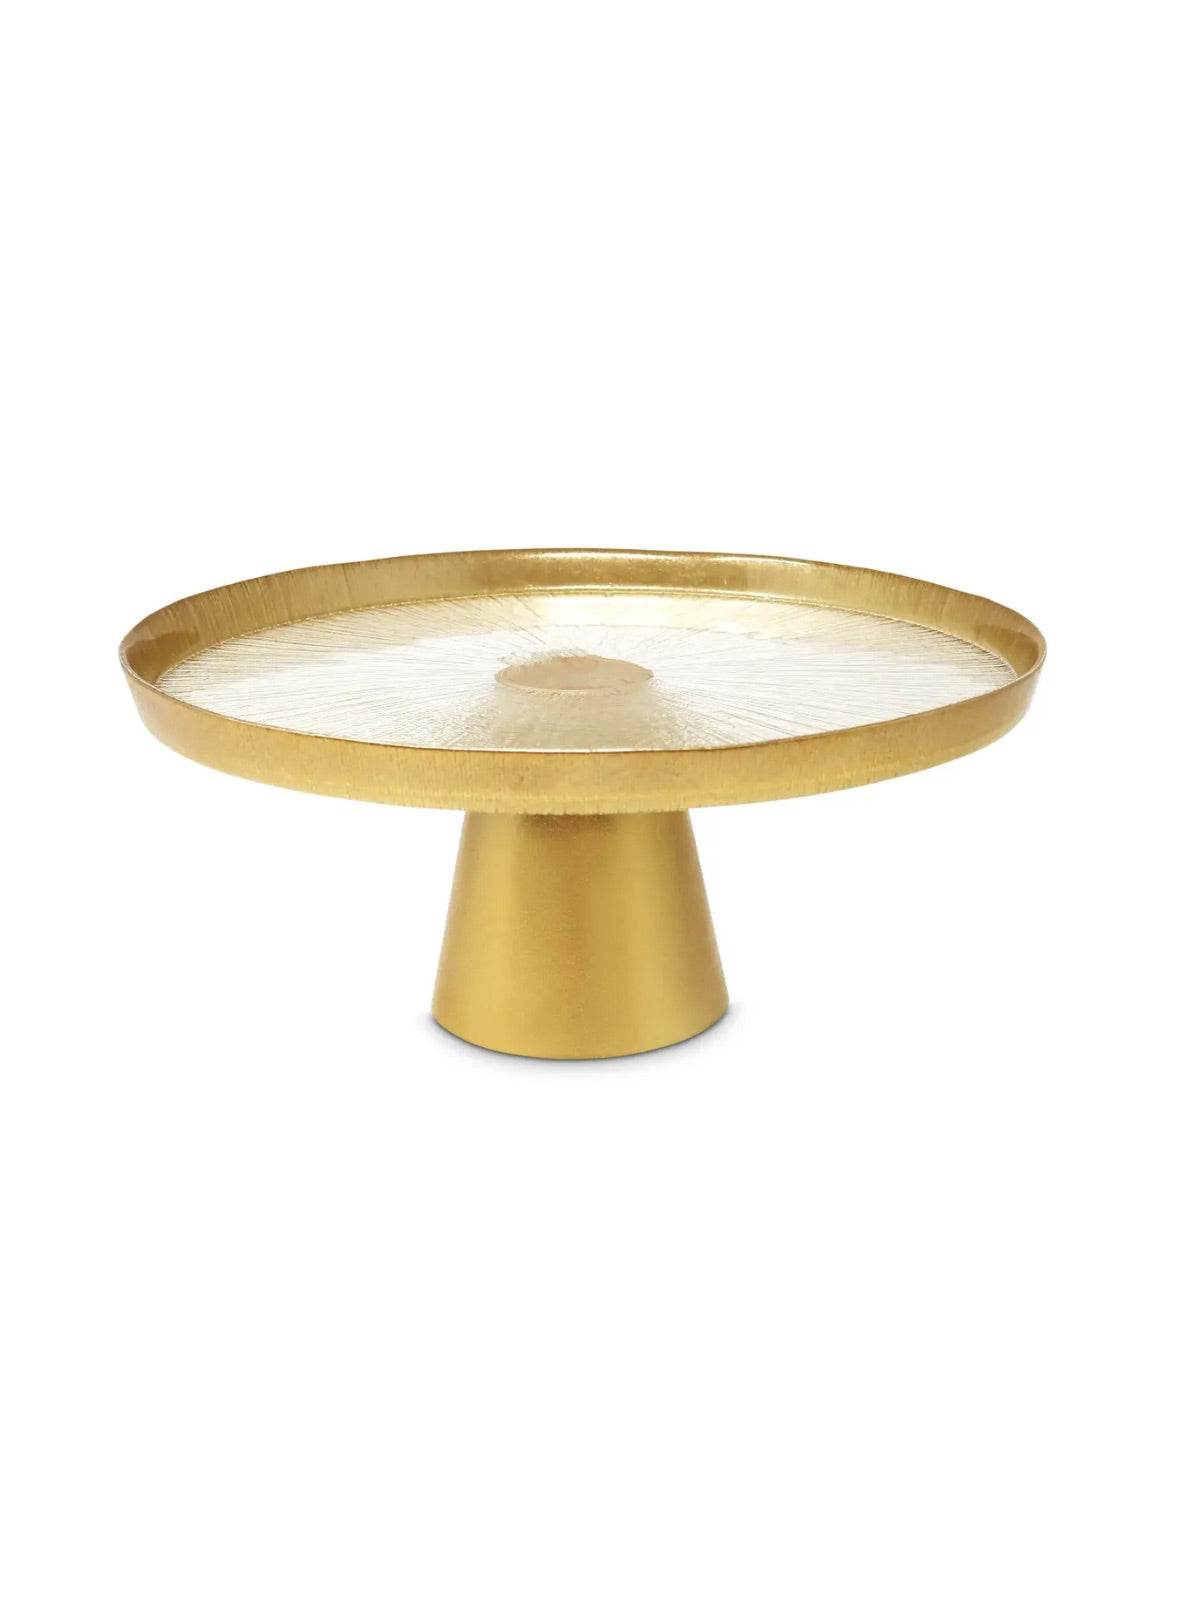 Glass Cake Plate with Gold Rim on Gold Base, Available in 2 Sizes.